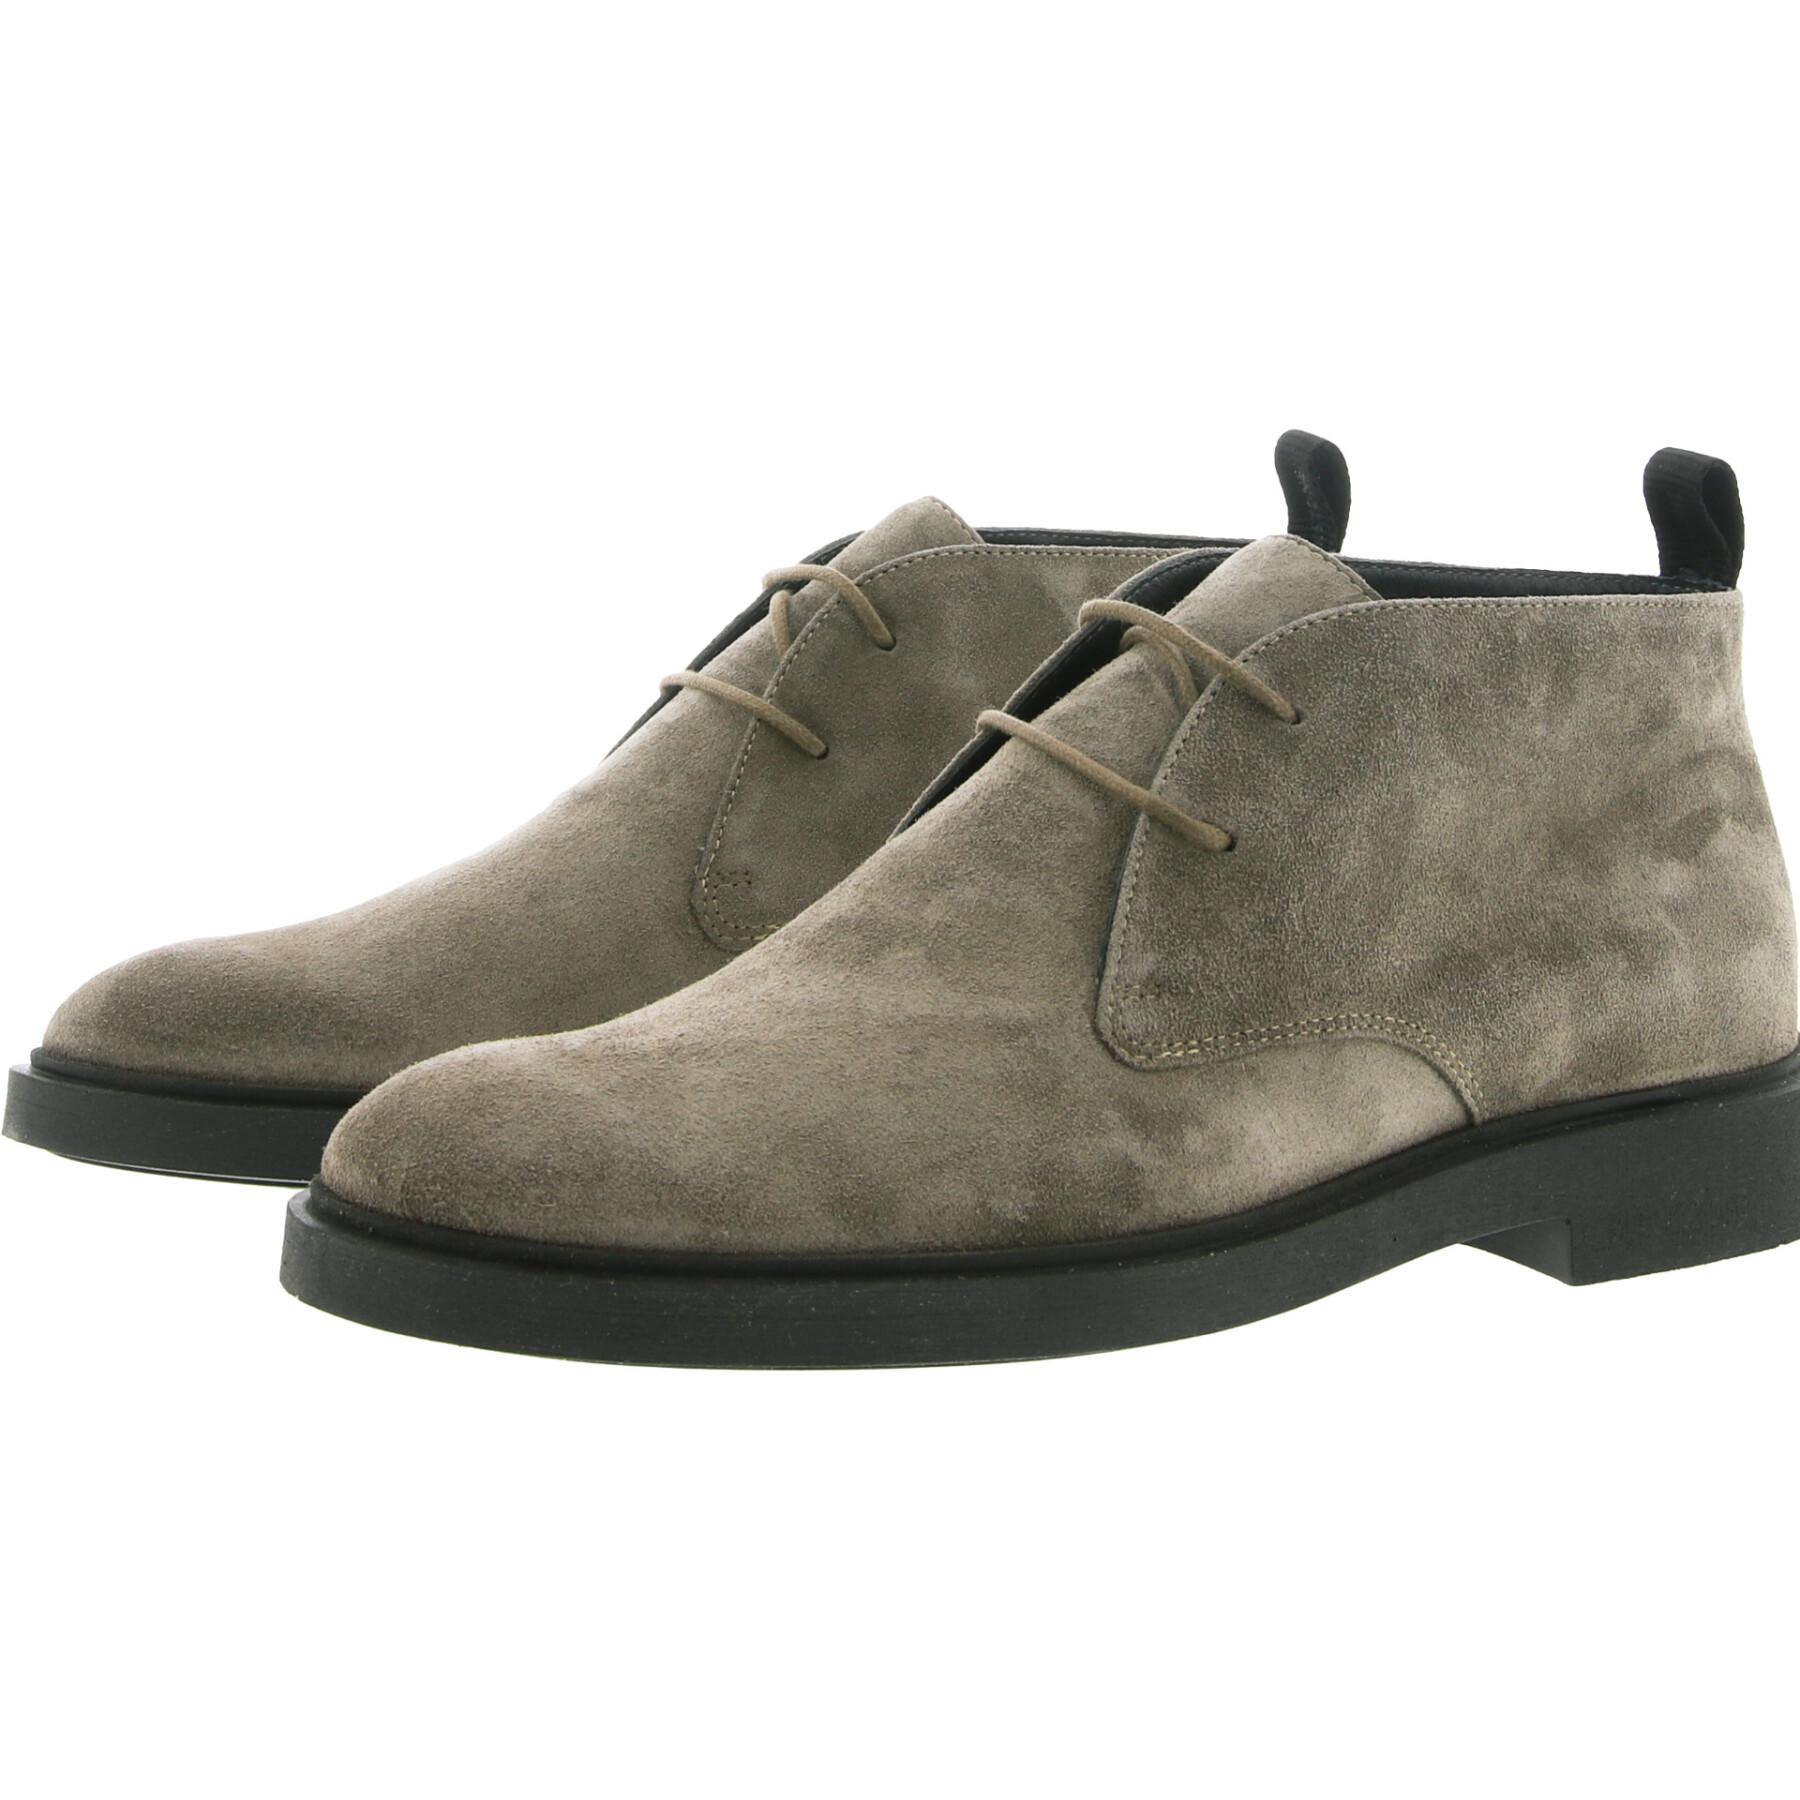 Suede boots Blackstone WG80 Taupe